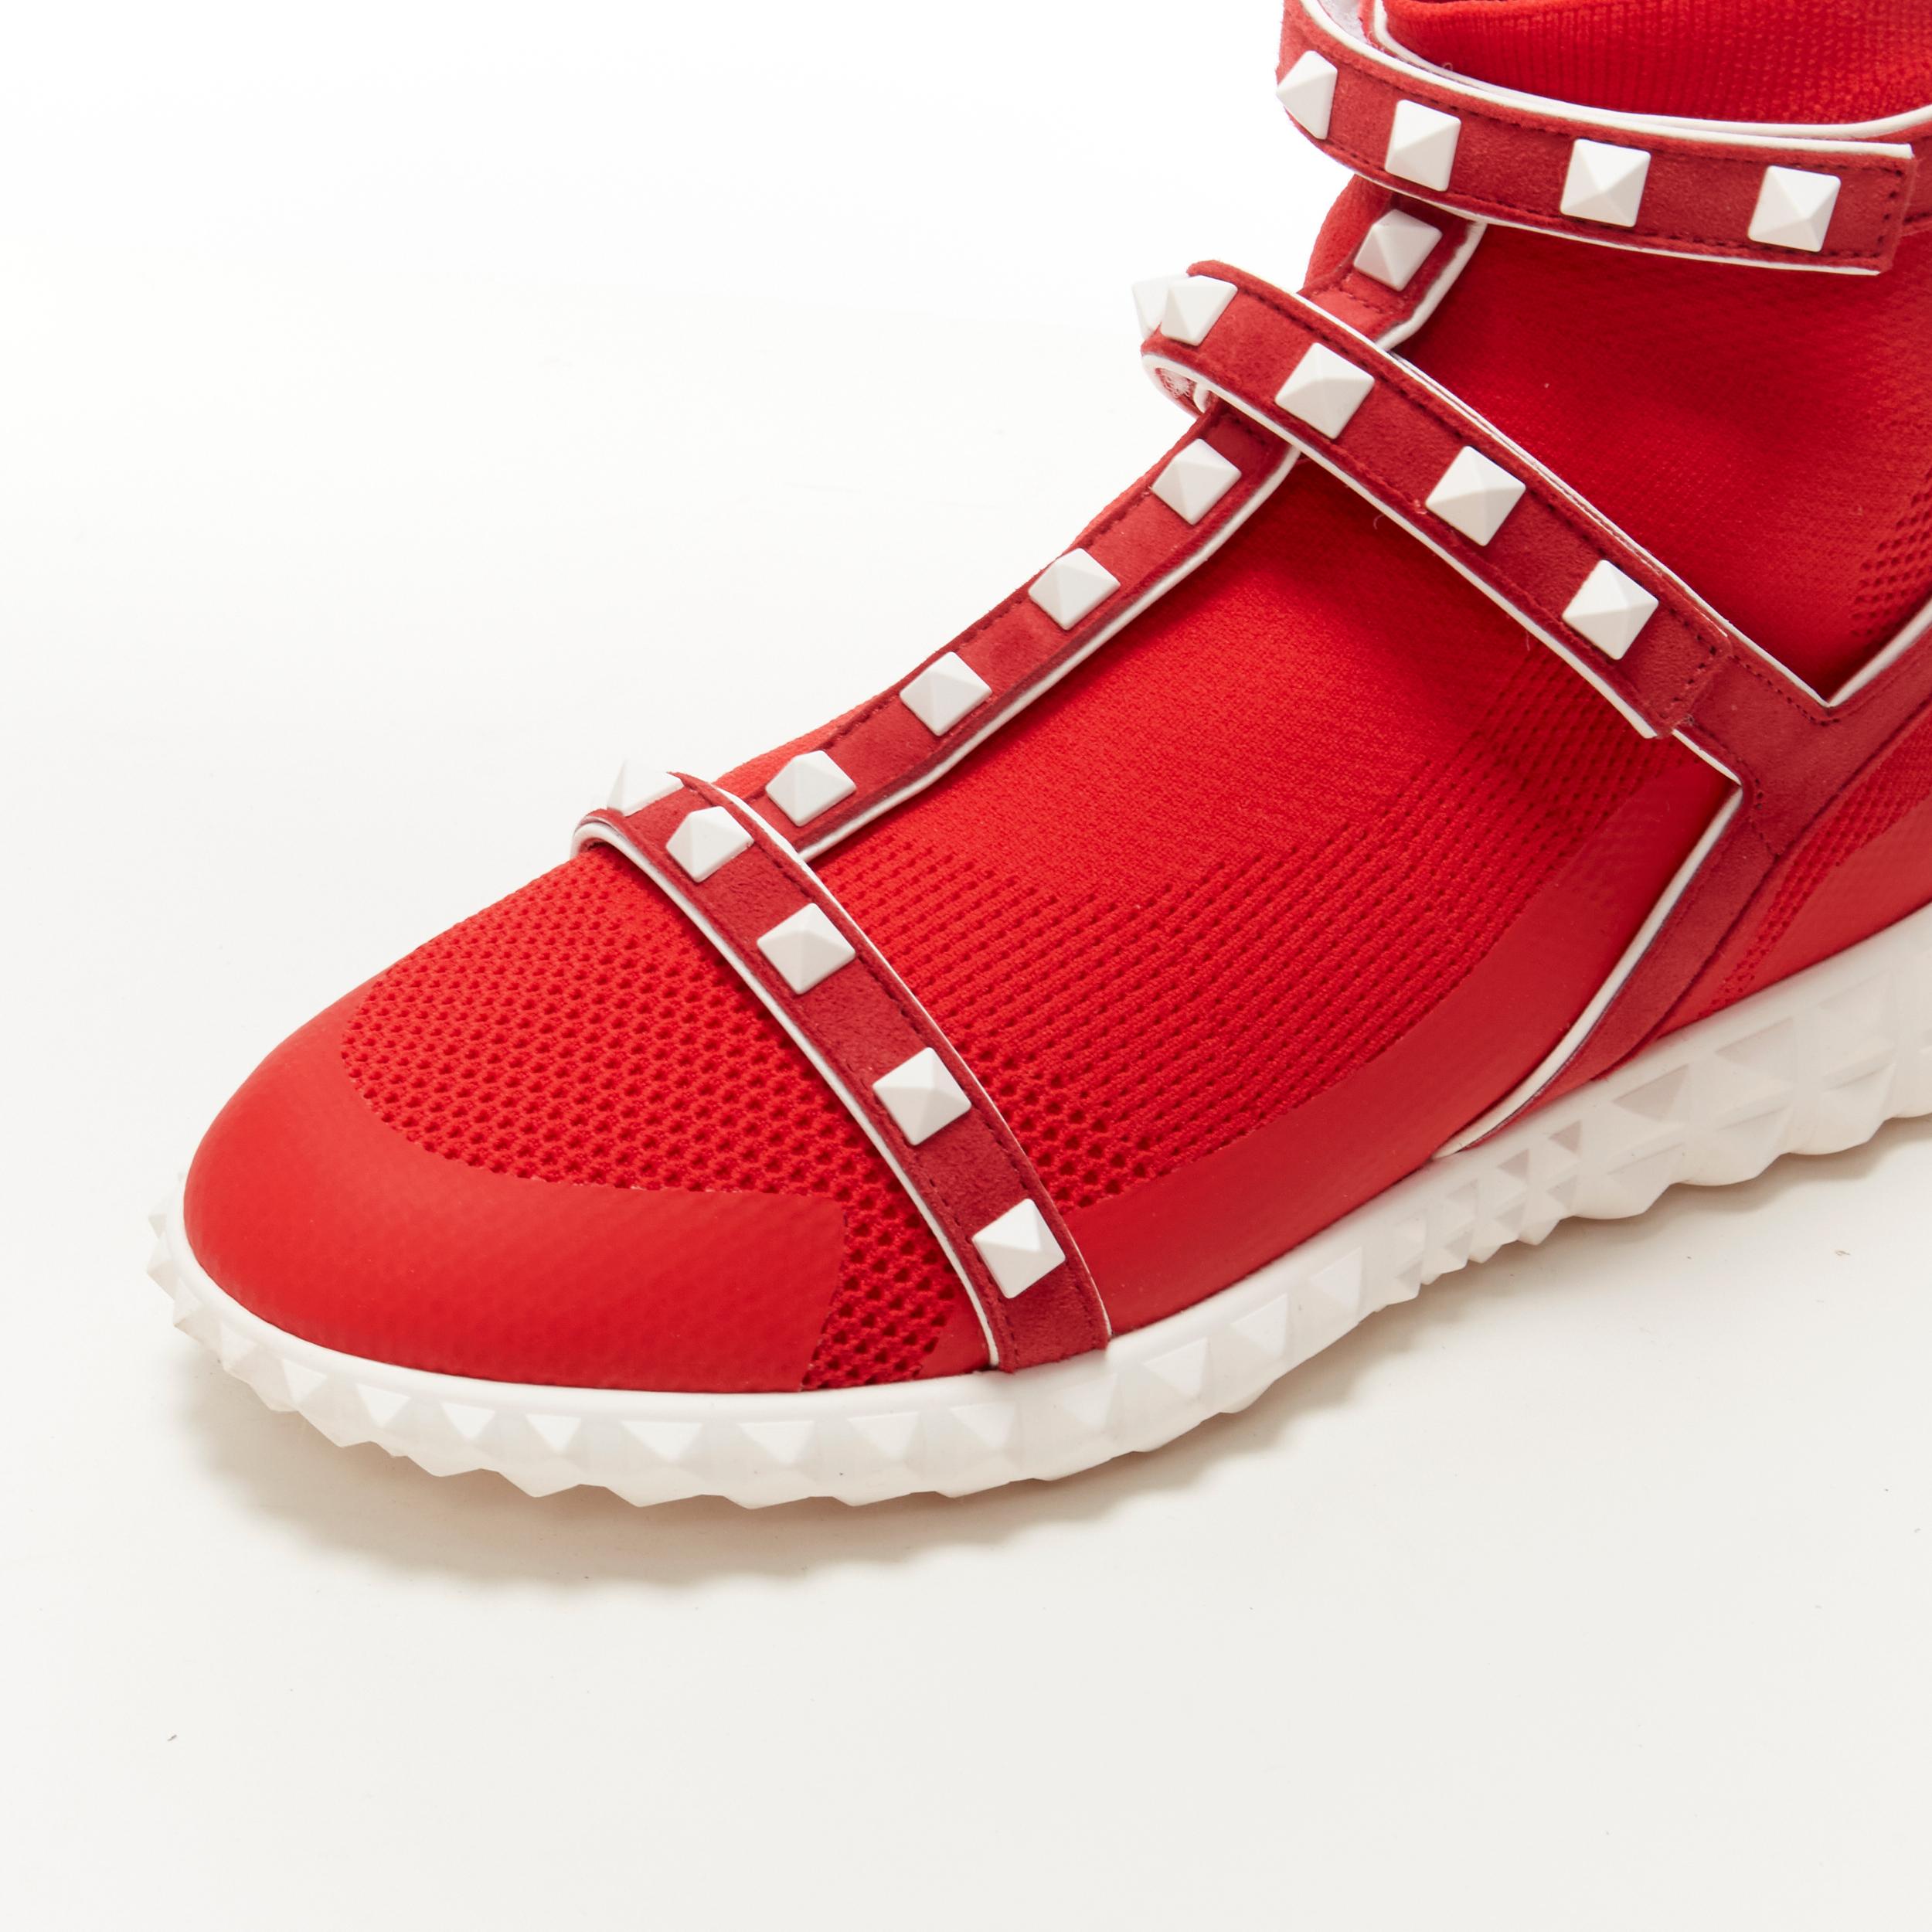 VALENTINO Free Rockstud Bodytech red sock knit white stud high top sneaker EU36 For Sale 2